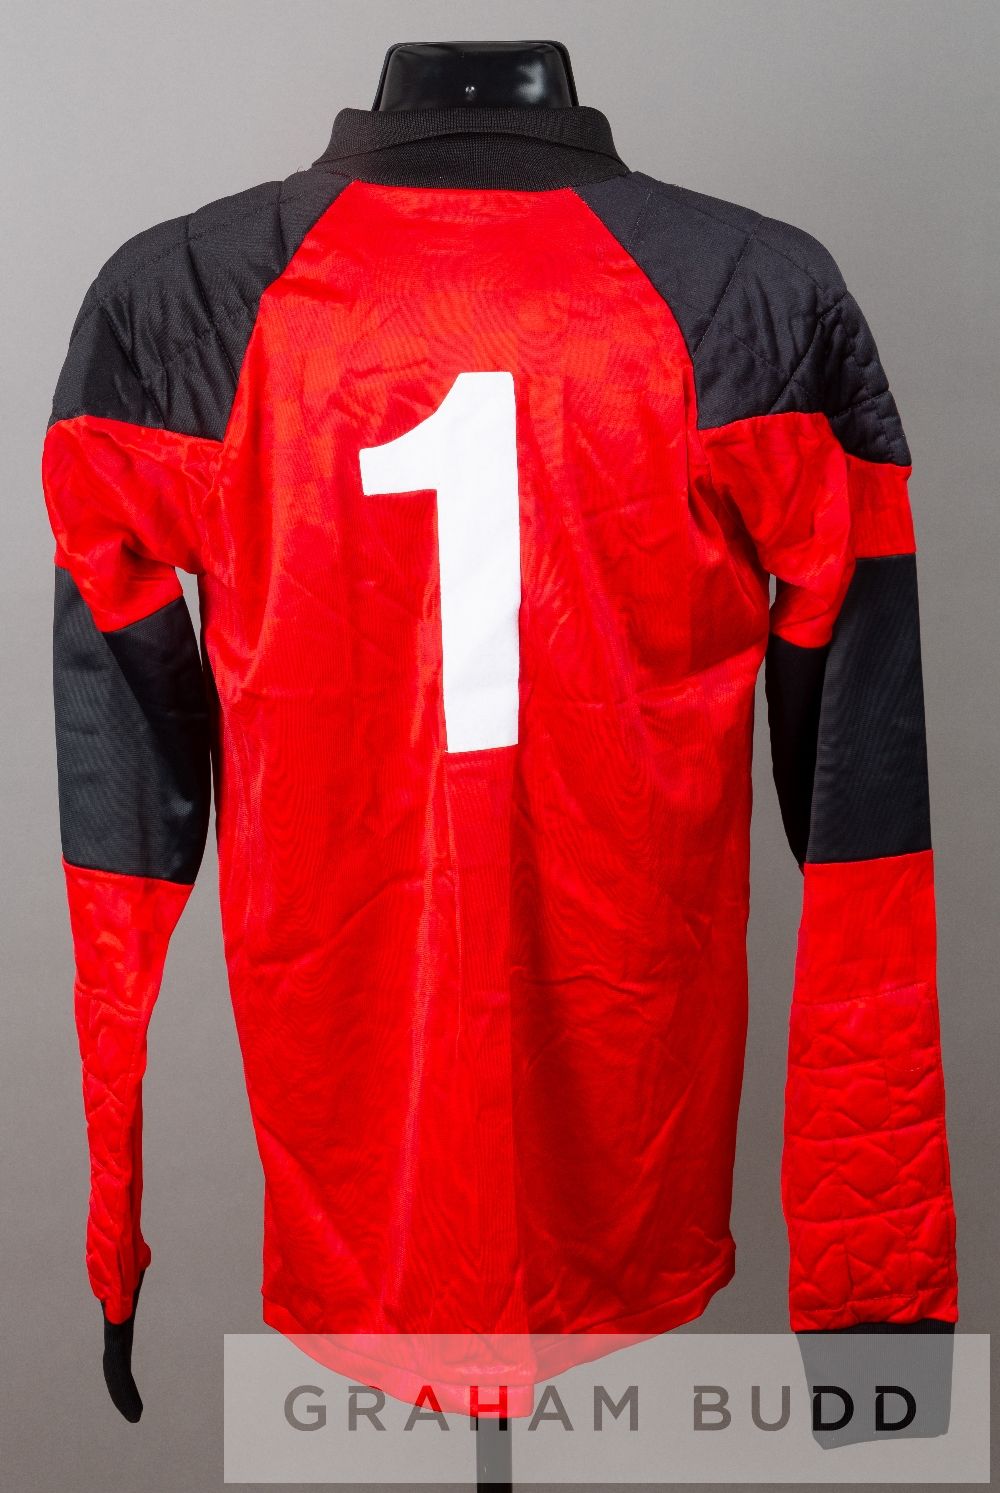 Alan Knight red and black Portsmouth no.1 goalkeeper's jersey, circa 1990, by Scoreline, long- - Image 2 of 2